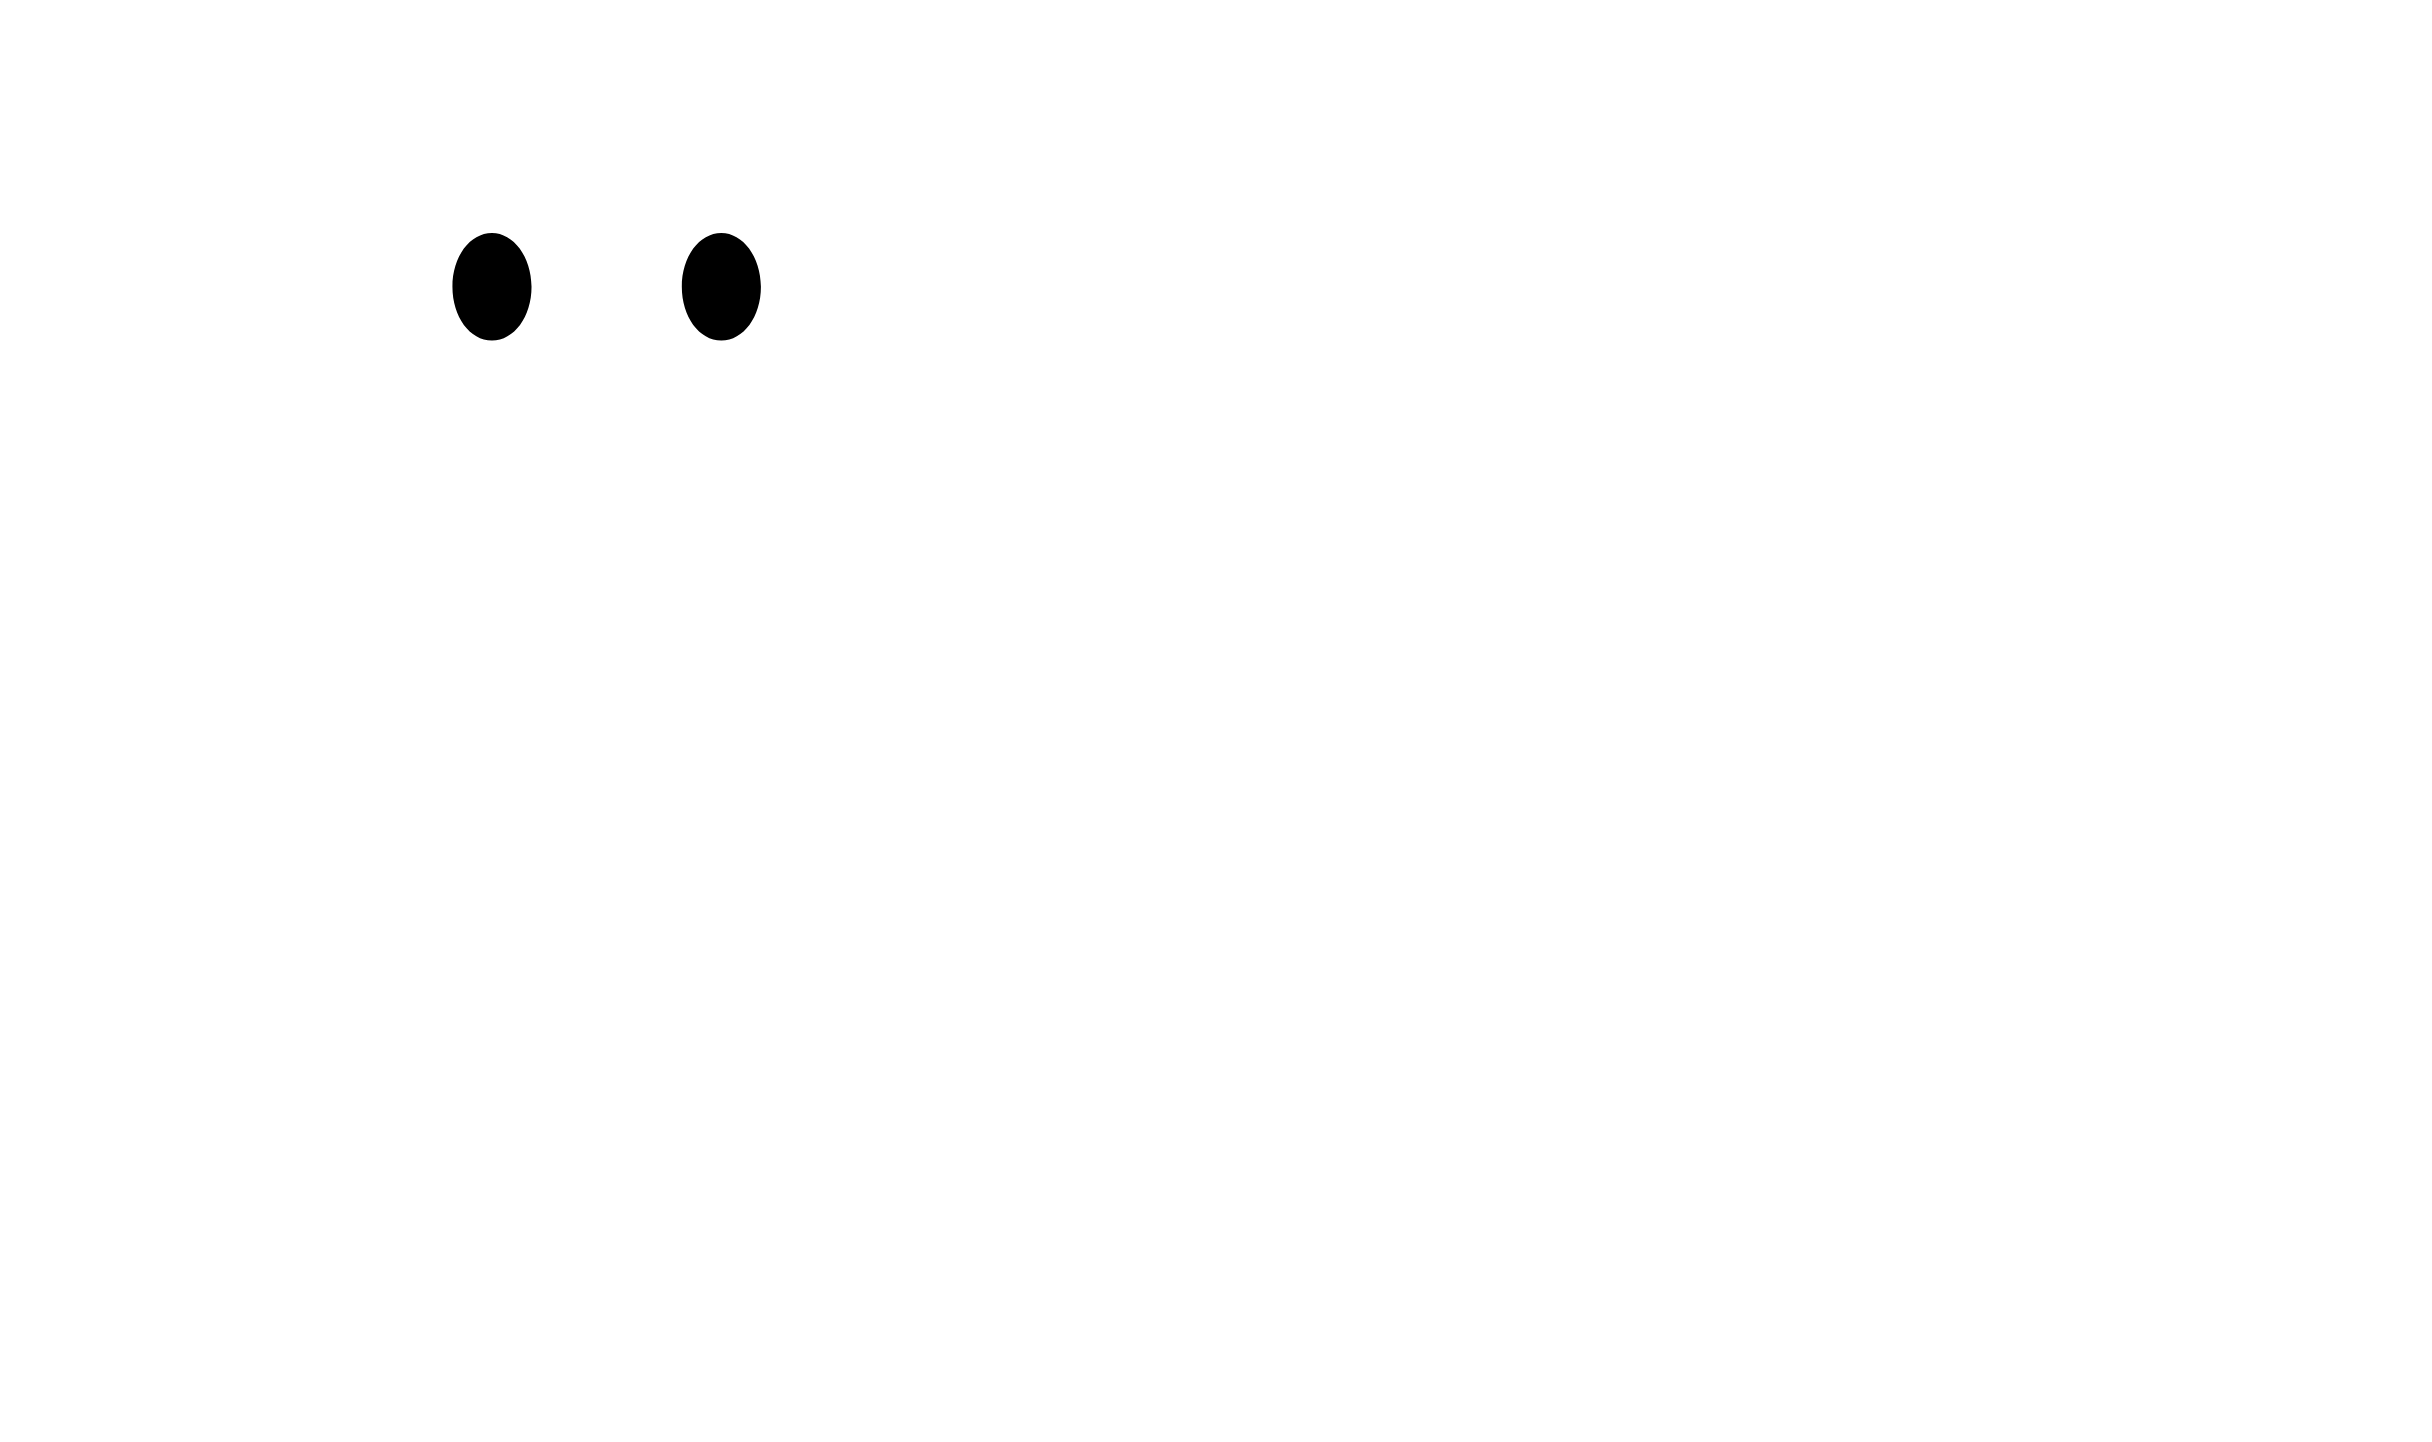 Ghost Image